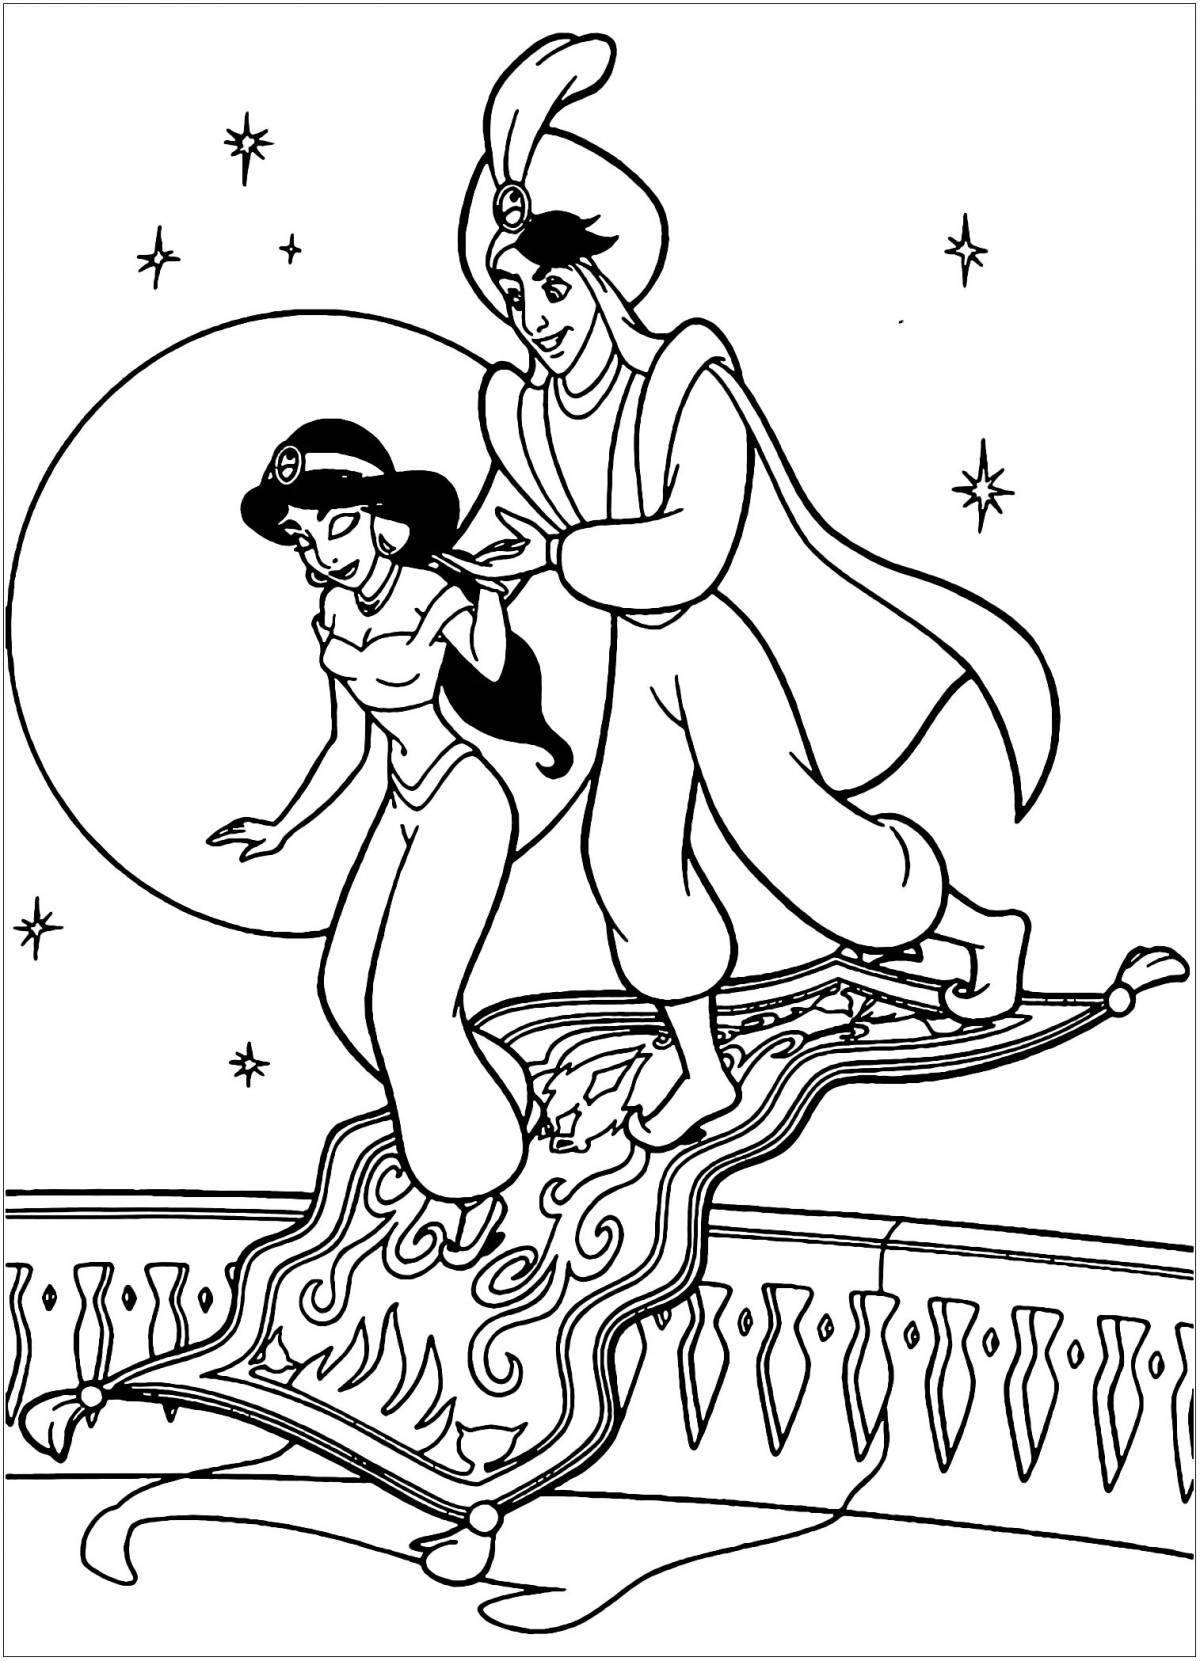 Glowing Aladdin coloring page